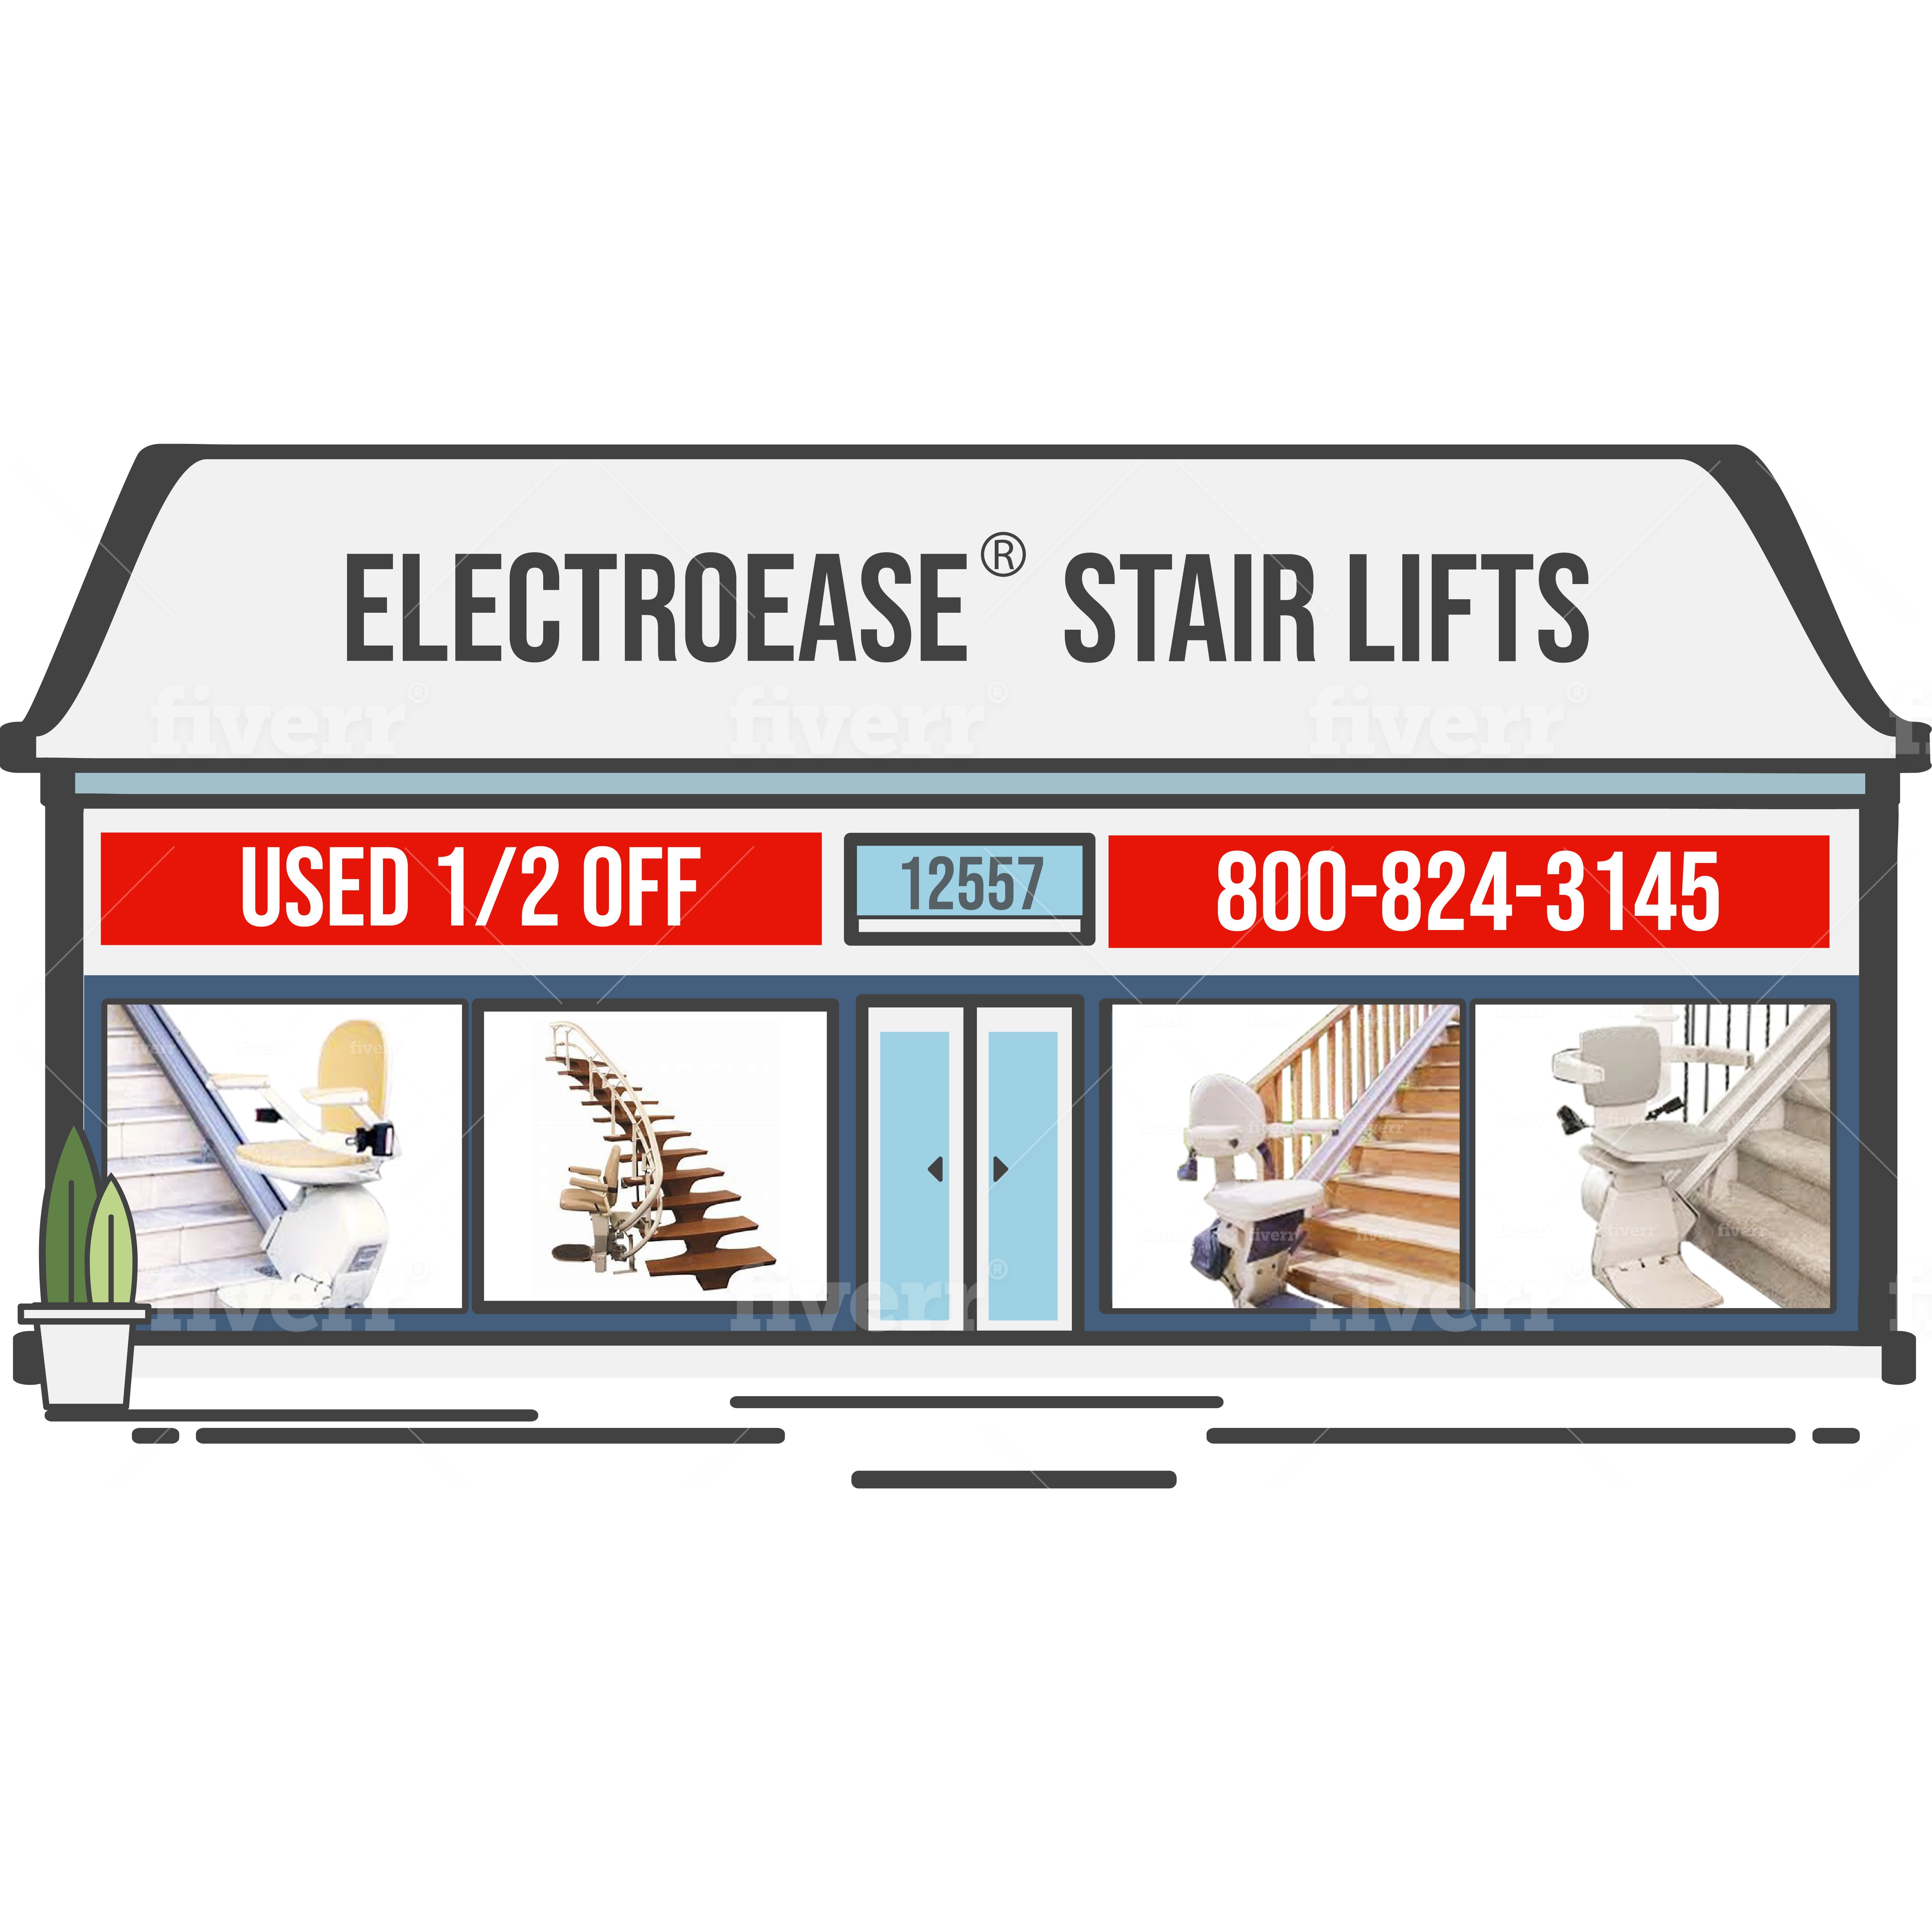 ElectroEase Stair Lifts Logo